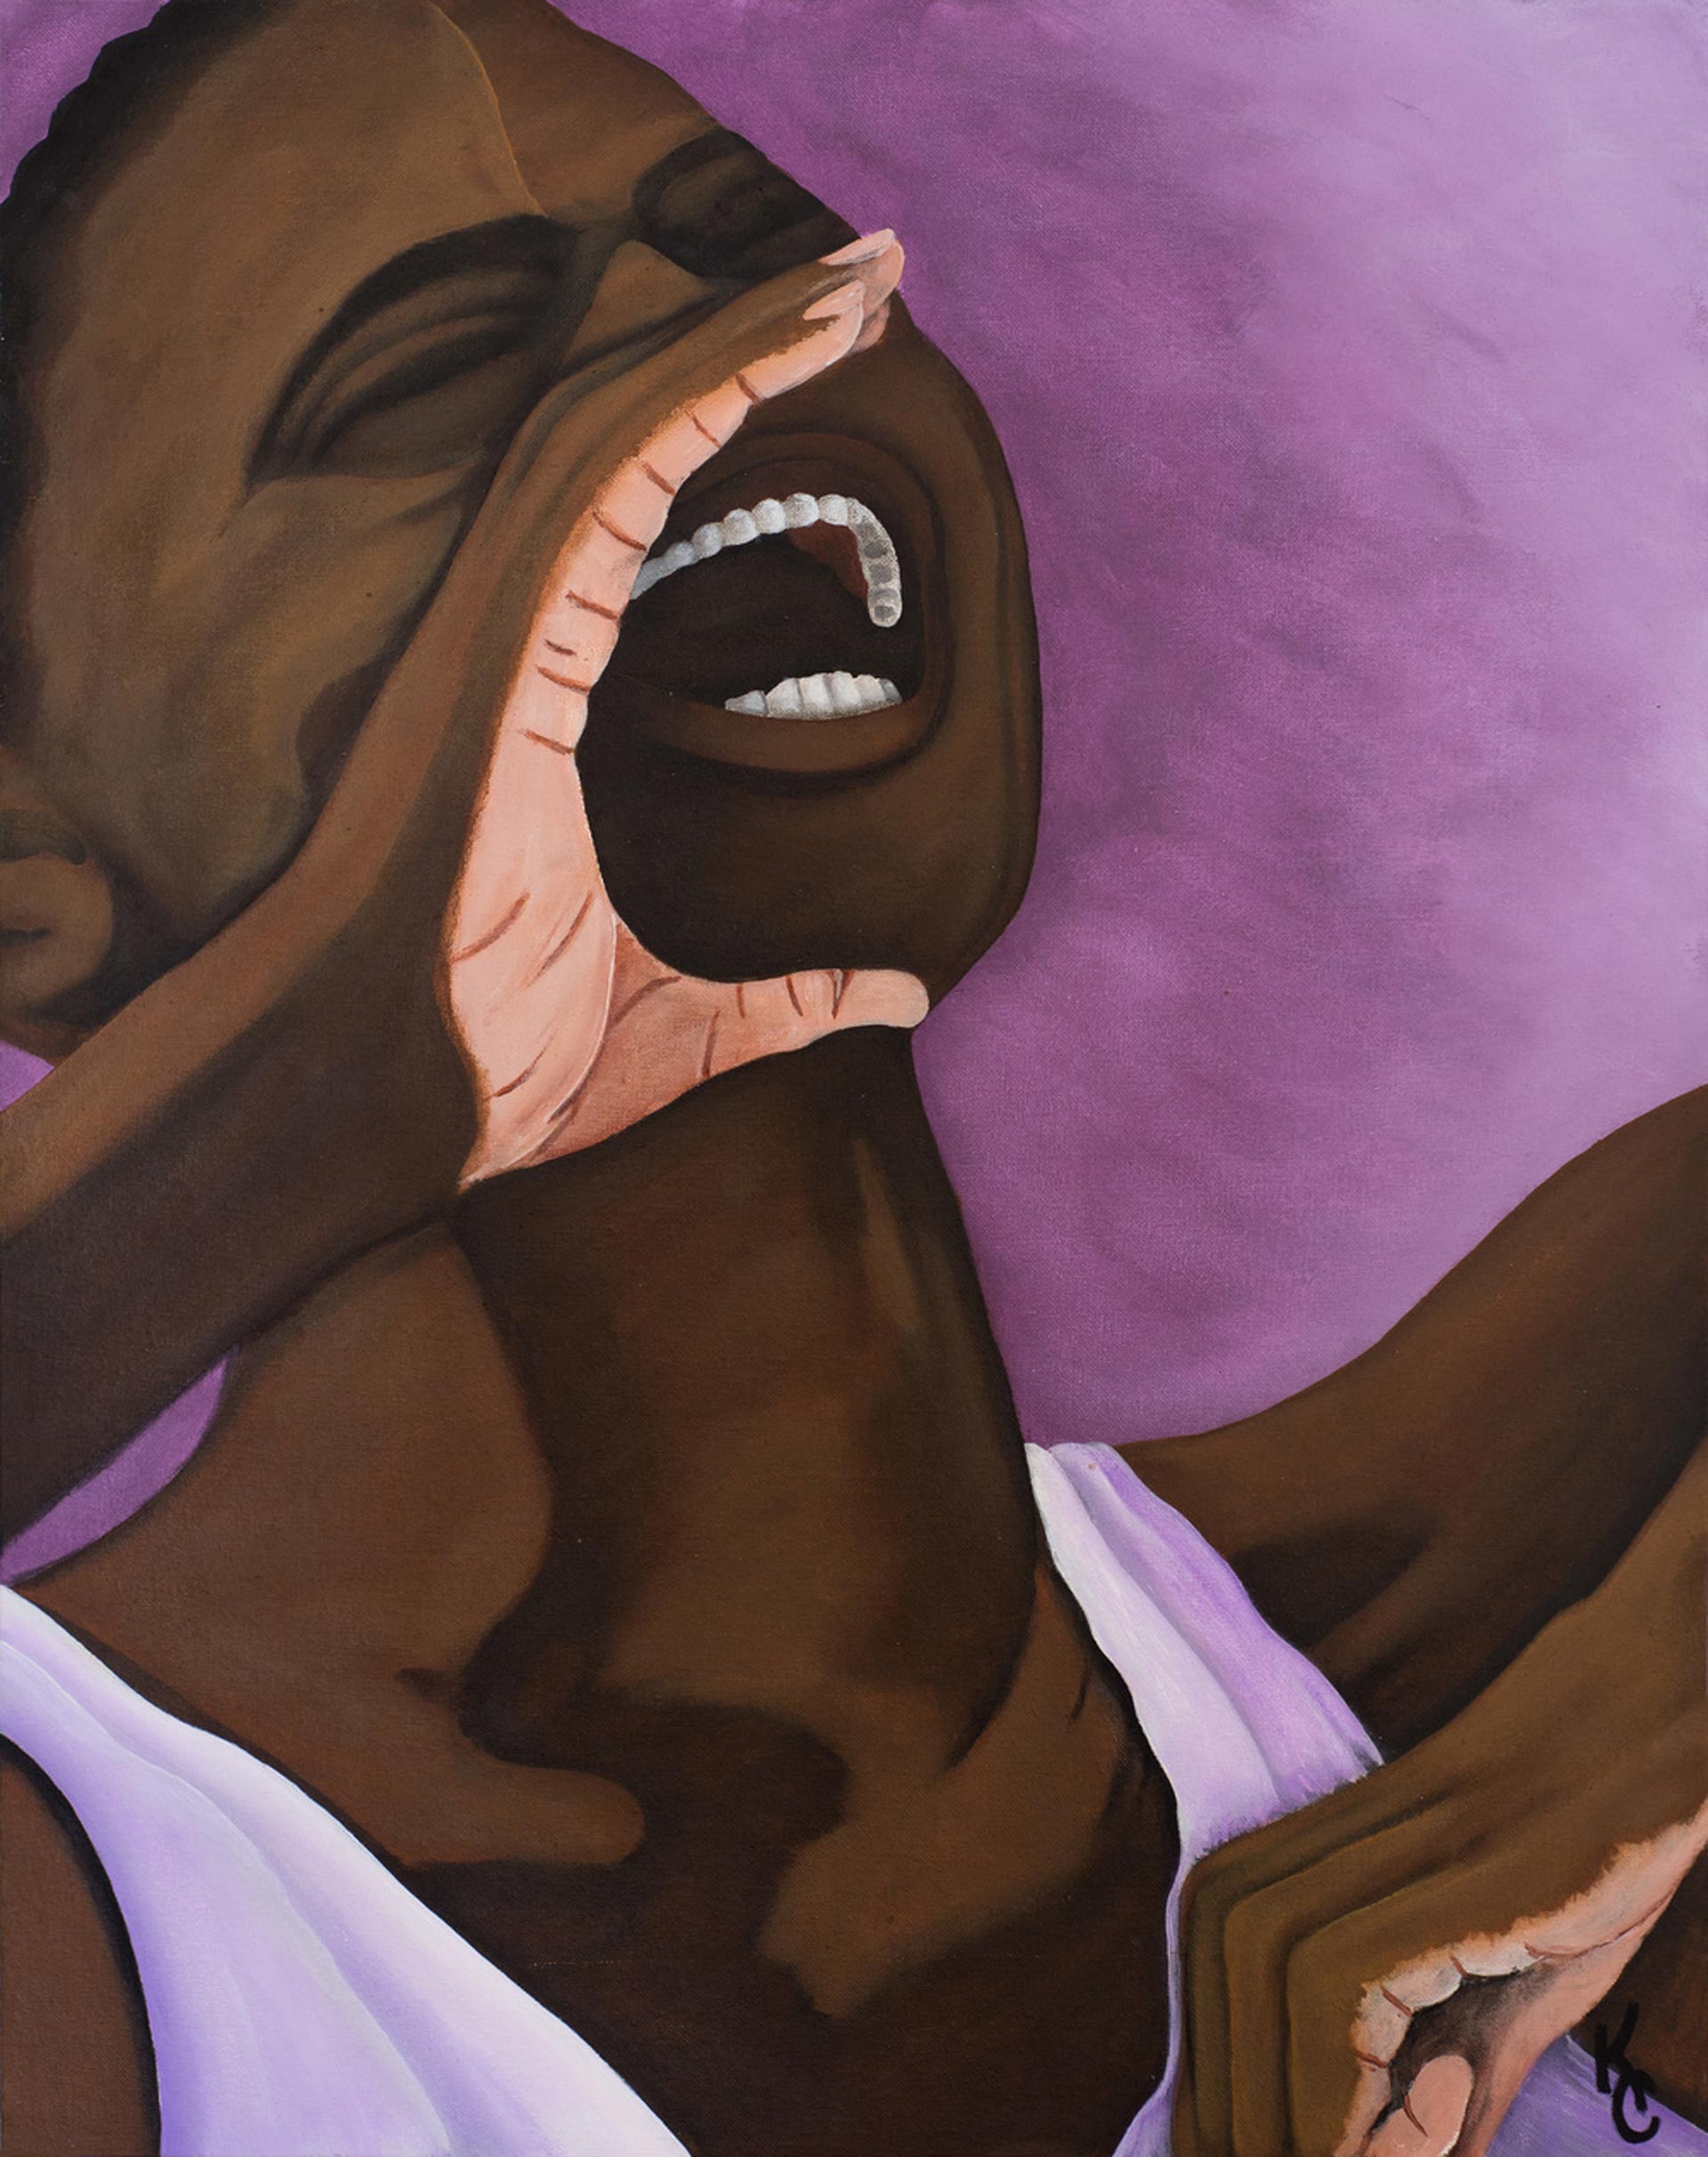 Kevin Cooper's "Free Me," part of the "Windows on Death Row" exhibition.